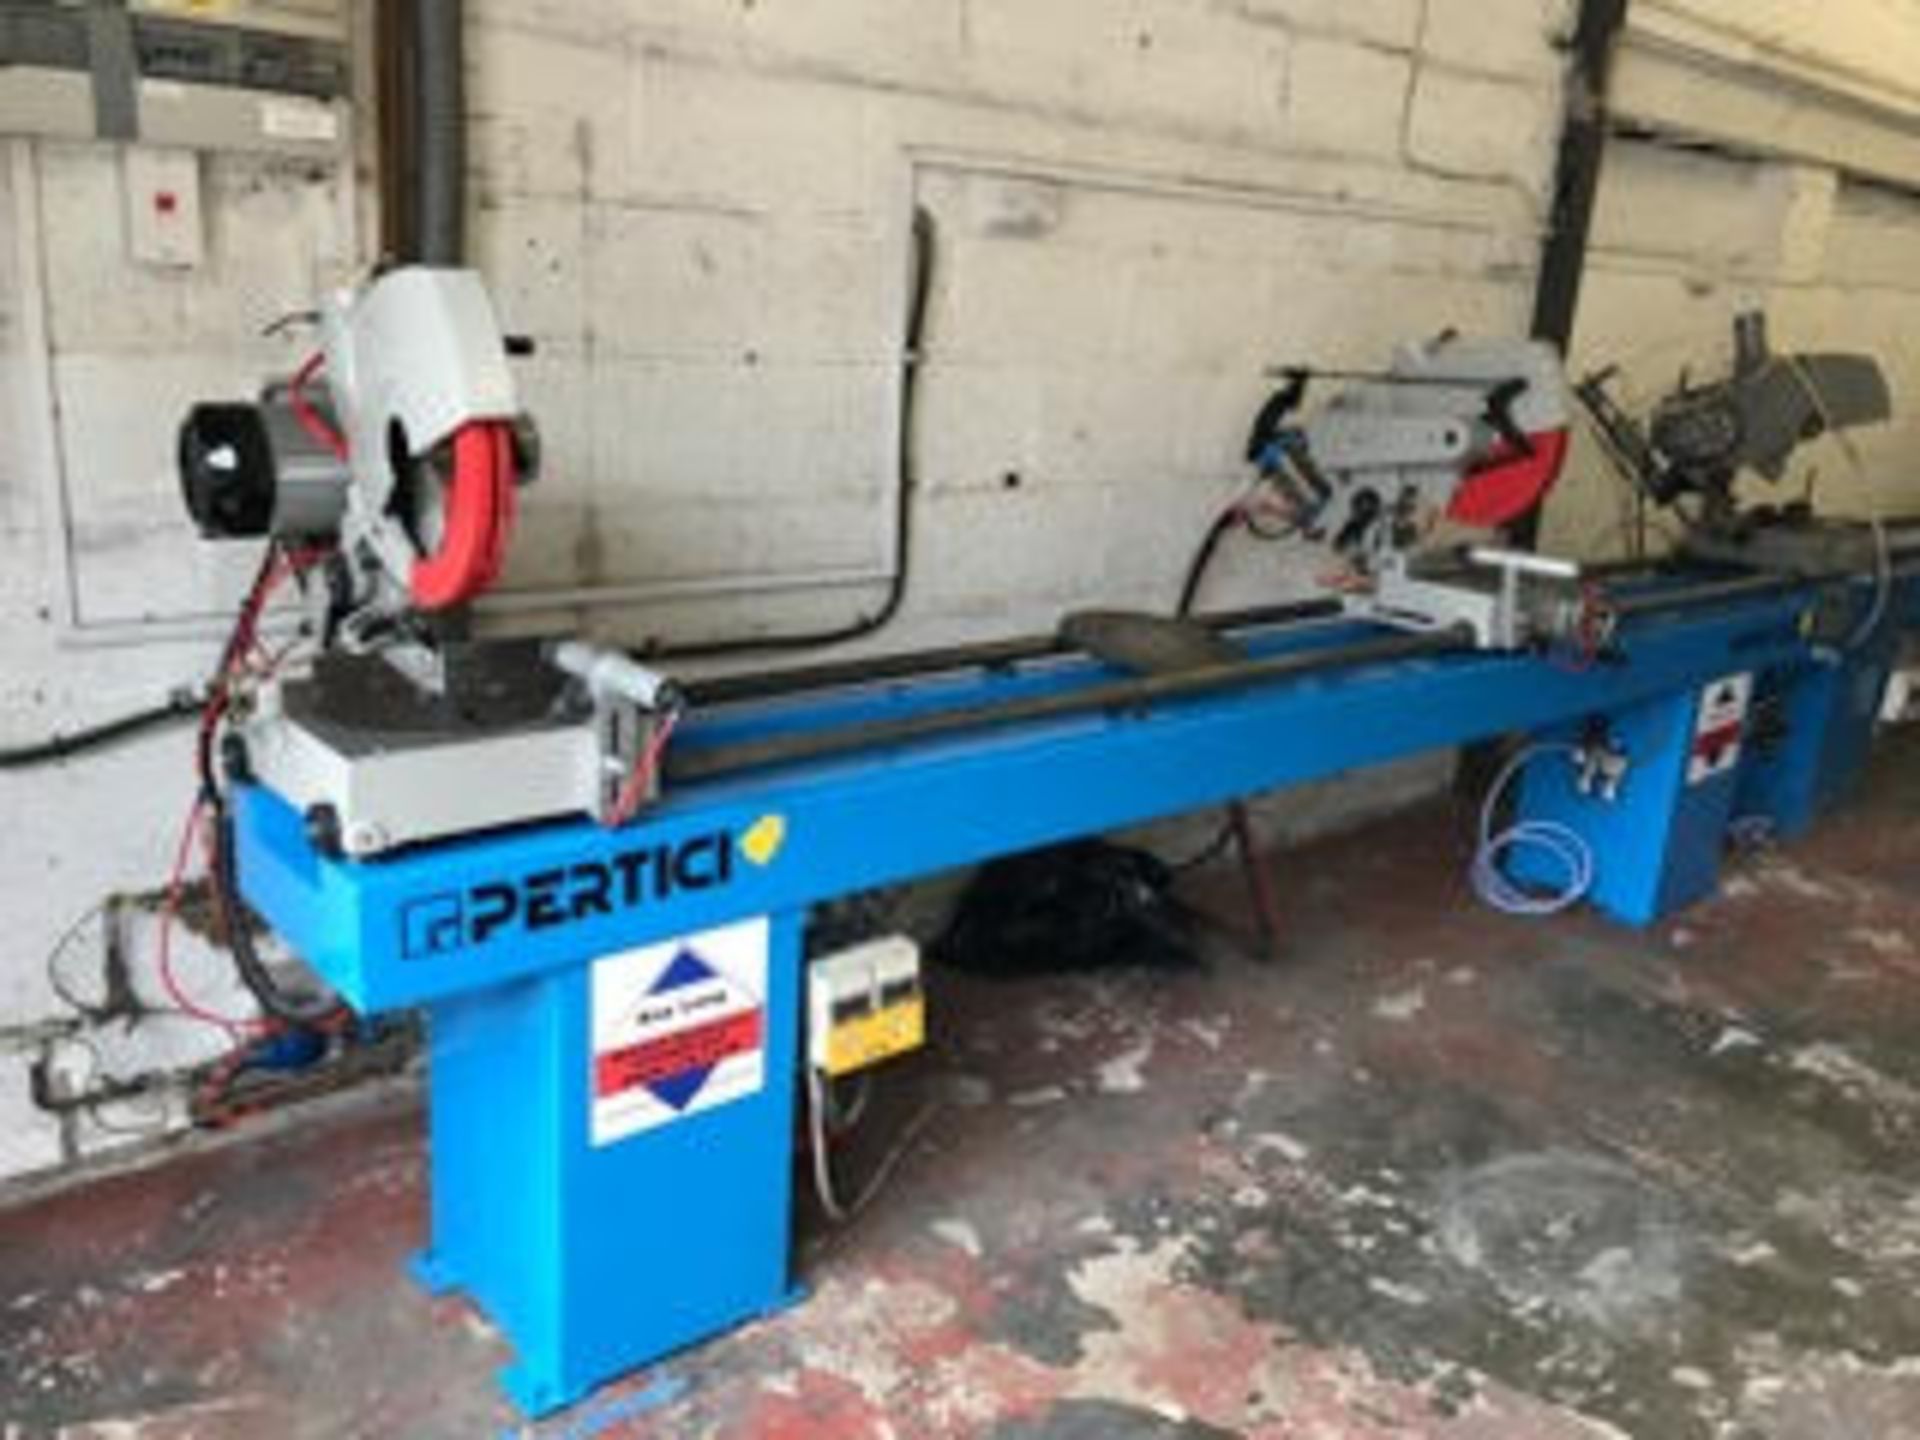 1 x Pertici Univer 332 Double Head Mitre Saw With 3 Meter Bed - Refurbished and Serviced - CL027 -